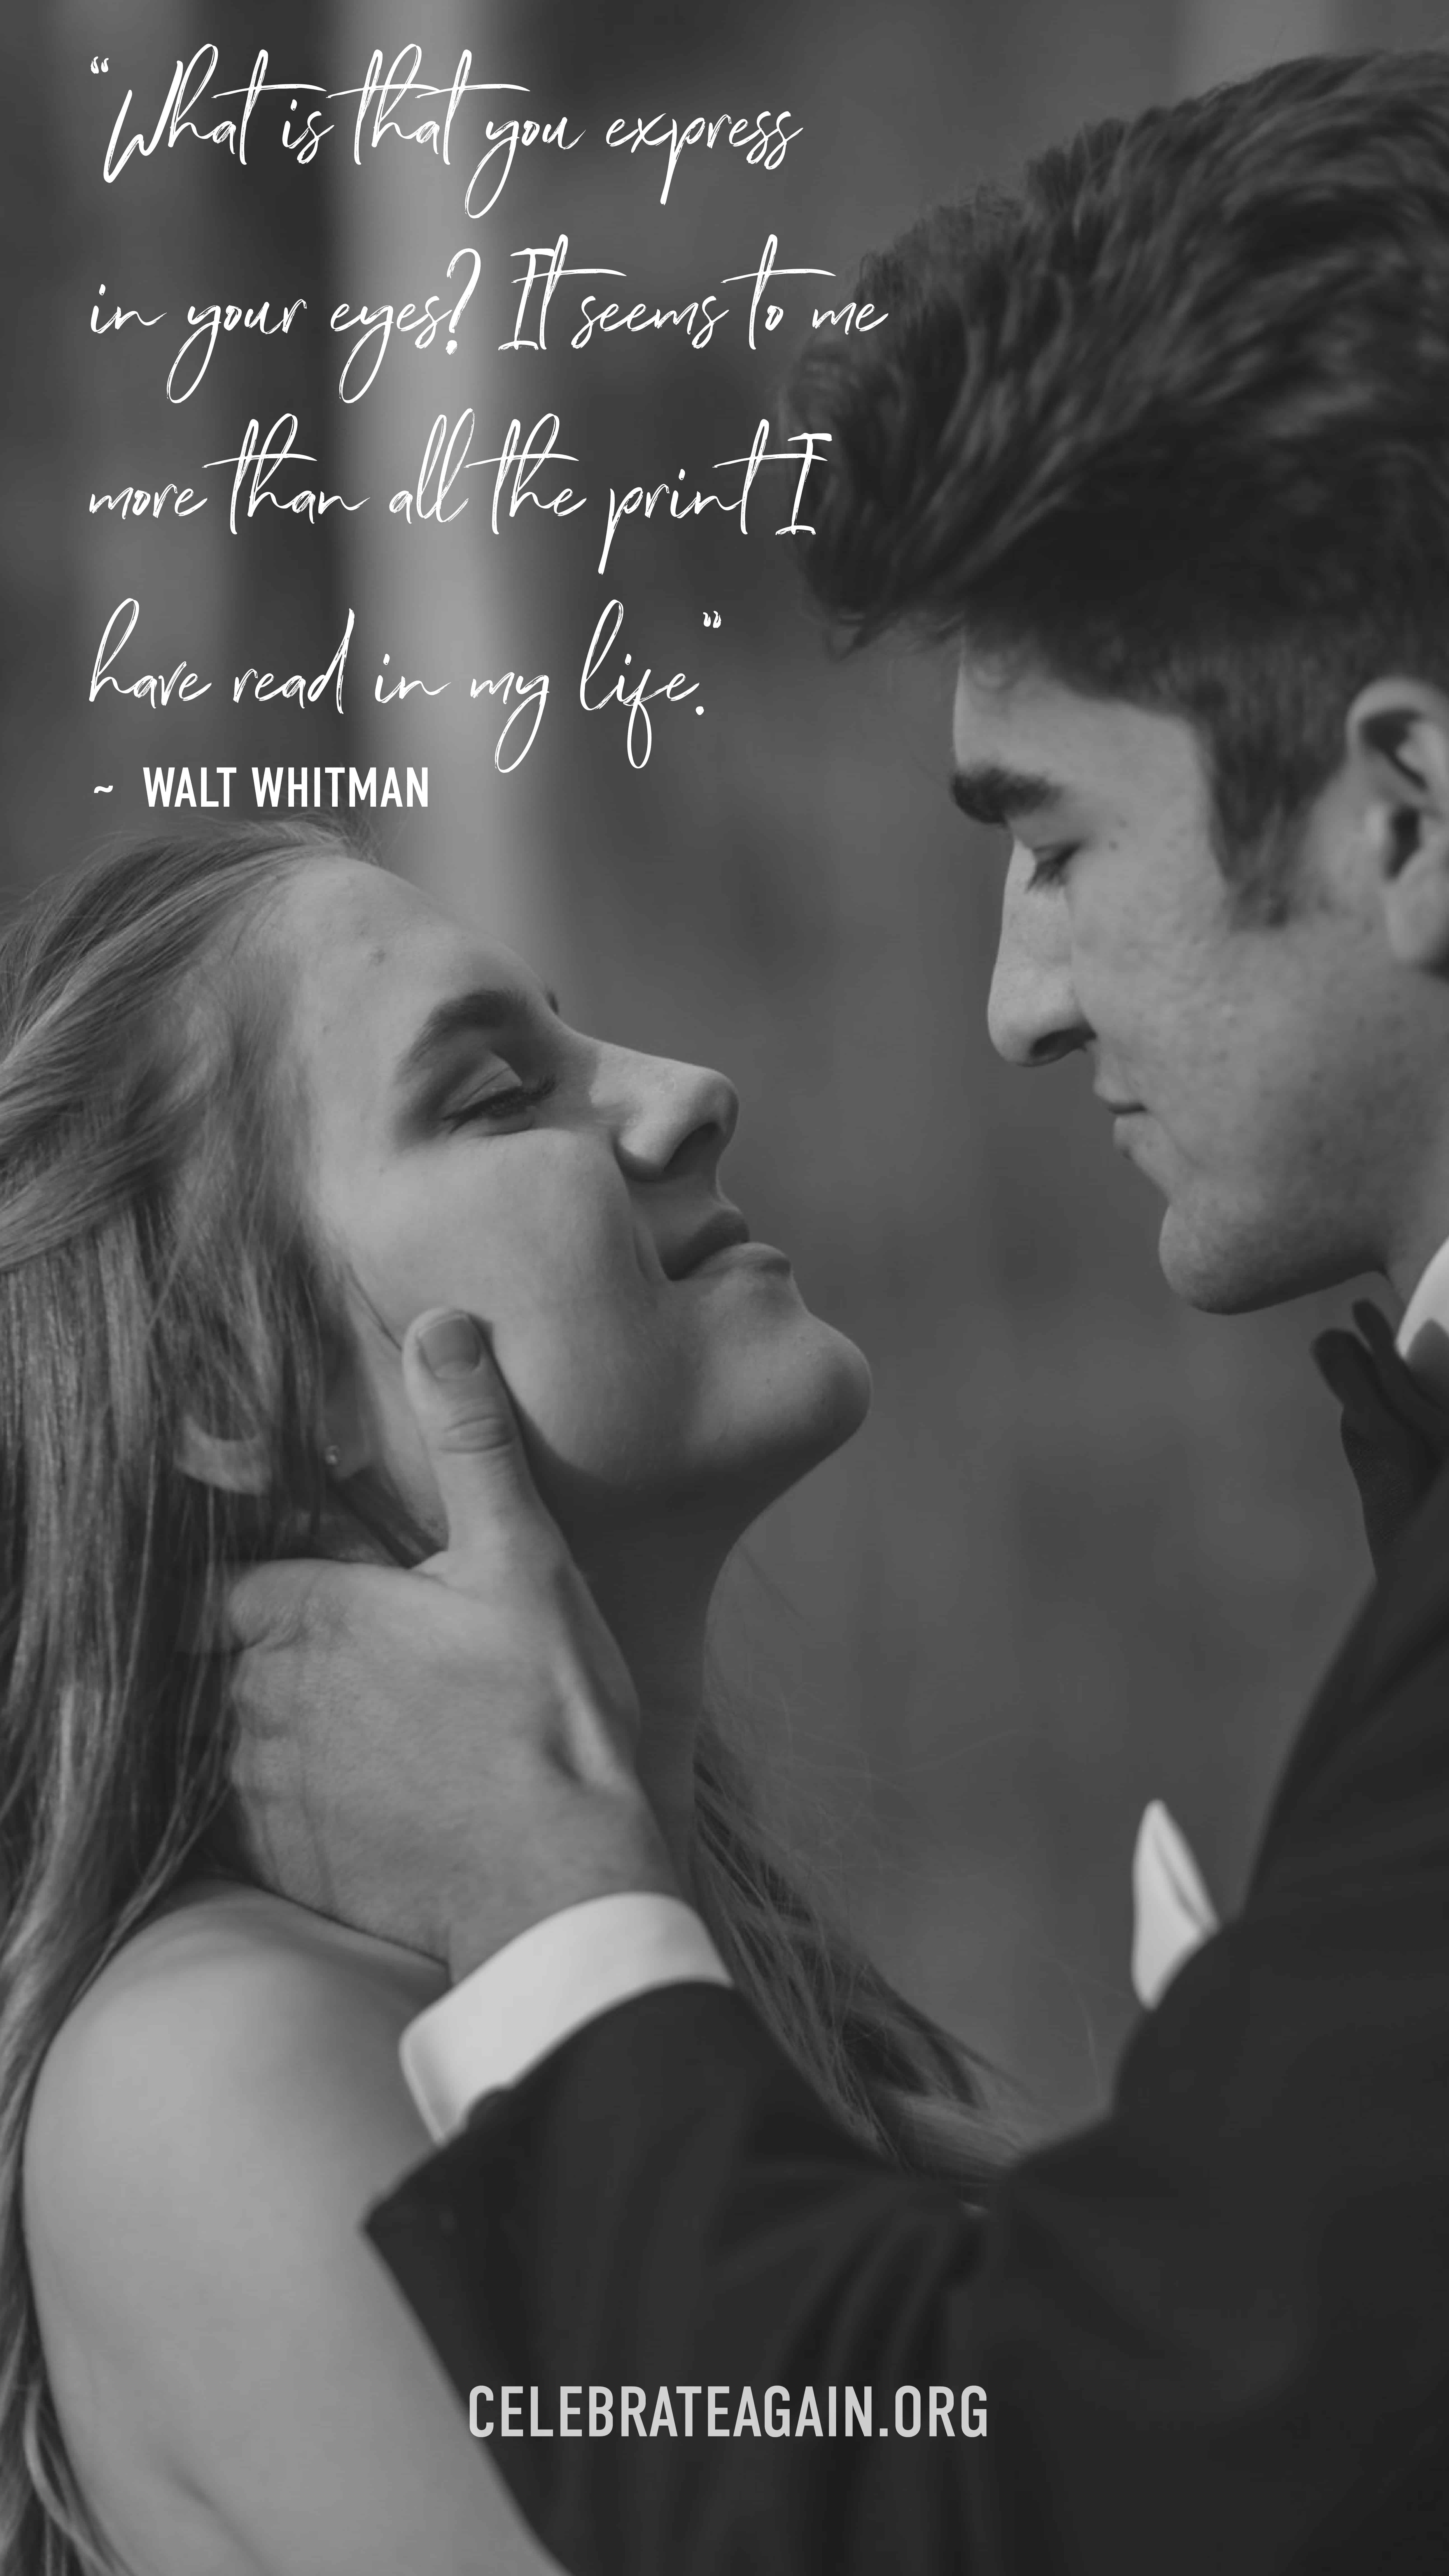 romantic love quote “What is that you express in your eyes? It seems to me more than all the print I have read in my life.” Walt Whitman image of groom holding brides neck her looking into his eyes image by celebrateagain.org